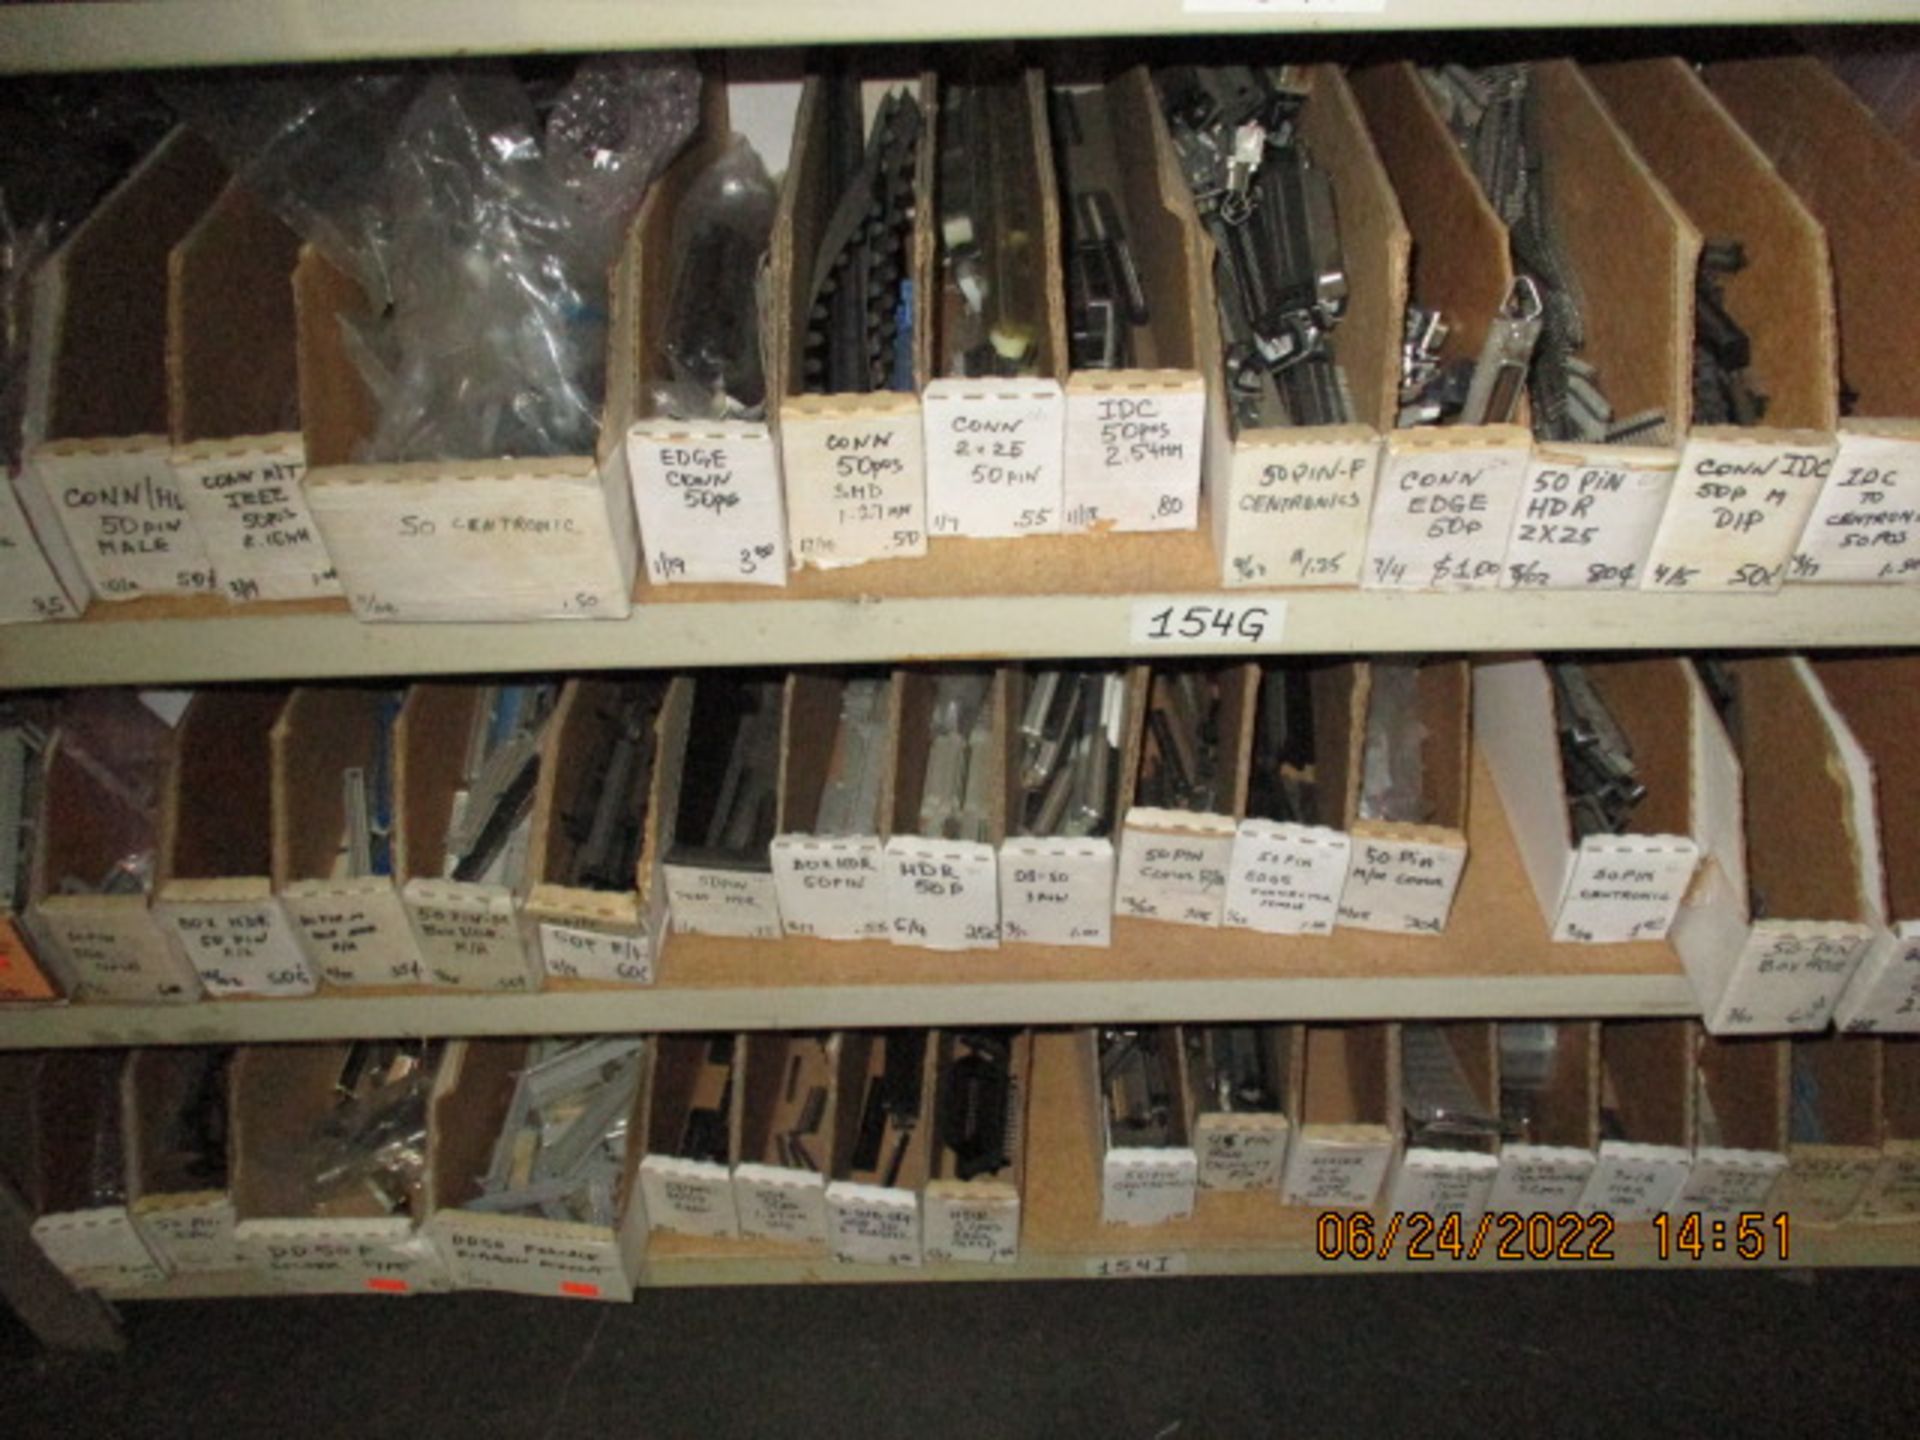 CONTENTS OF SHELVING UNIT CONSISTING OF 44, 45, 46, 48, 50, 52, 55, & 56 PIN CONNECTORS - Image 6 of 6